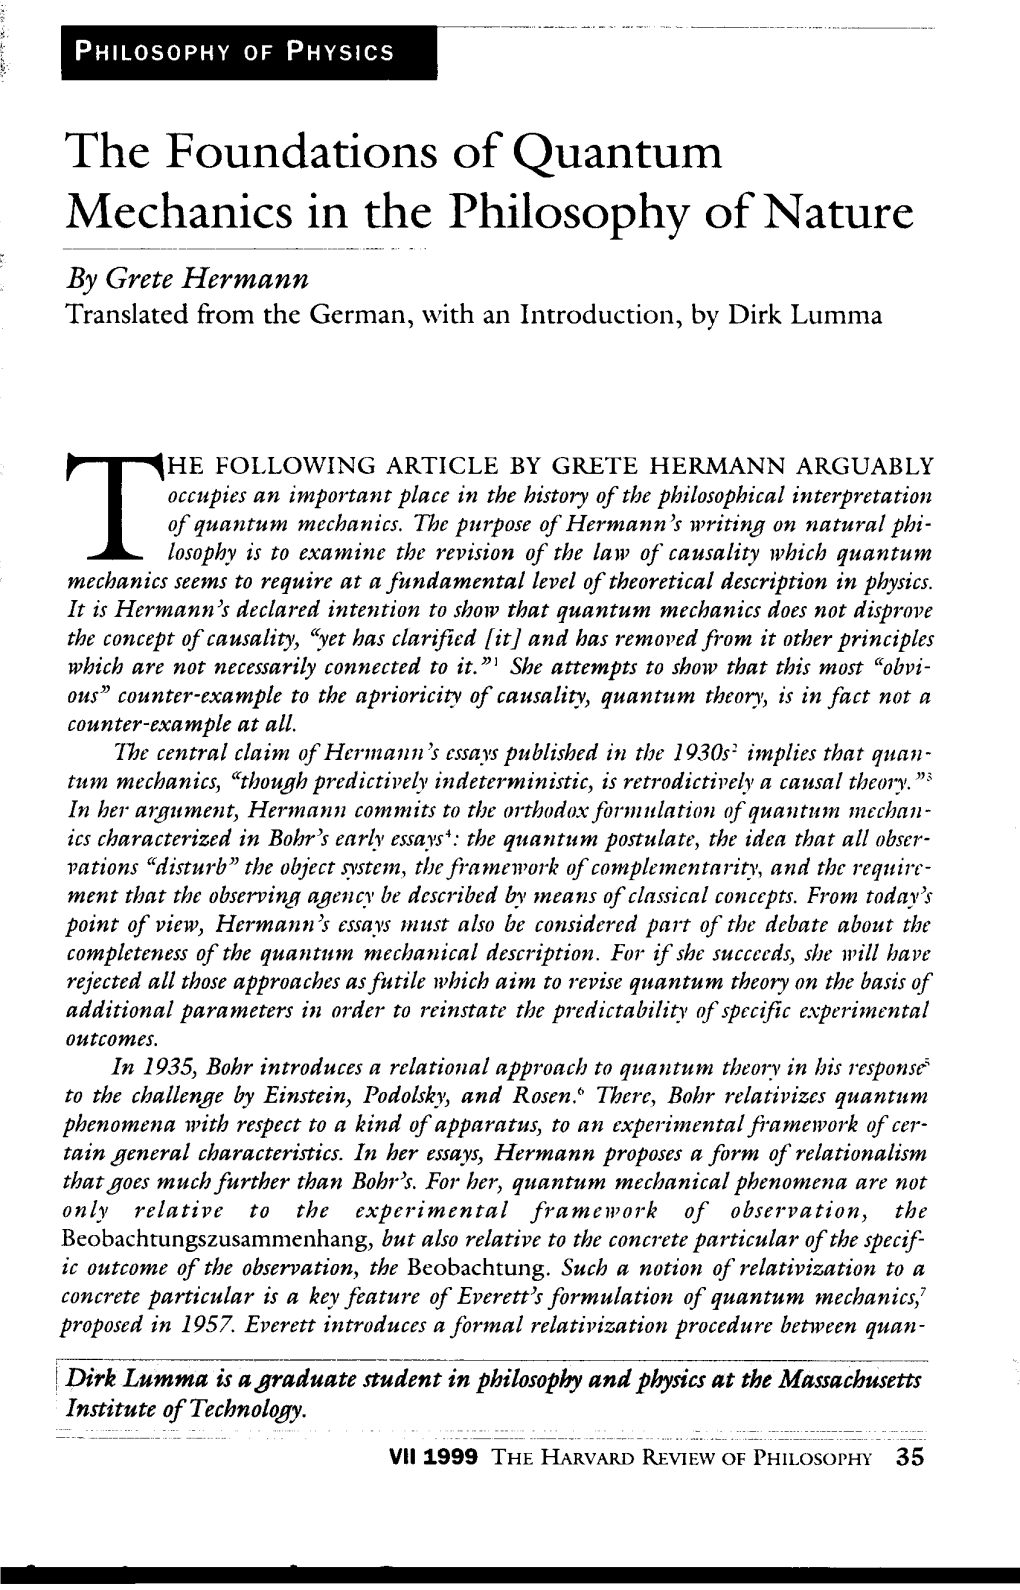 The Foundations of Quantum Mechanics in the Philosophy of Nature -- - by Grete Hermann Translated from the German, with an Introduction, by Dirk Lumma